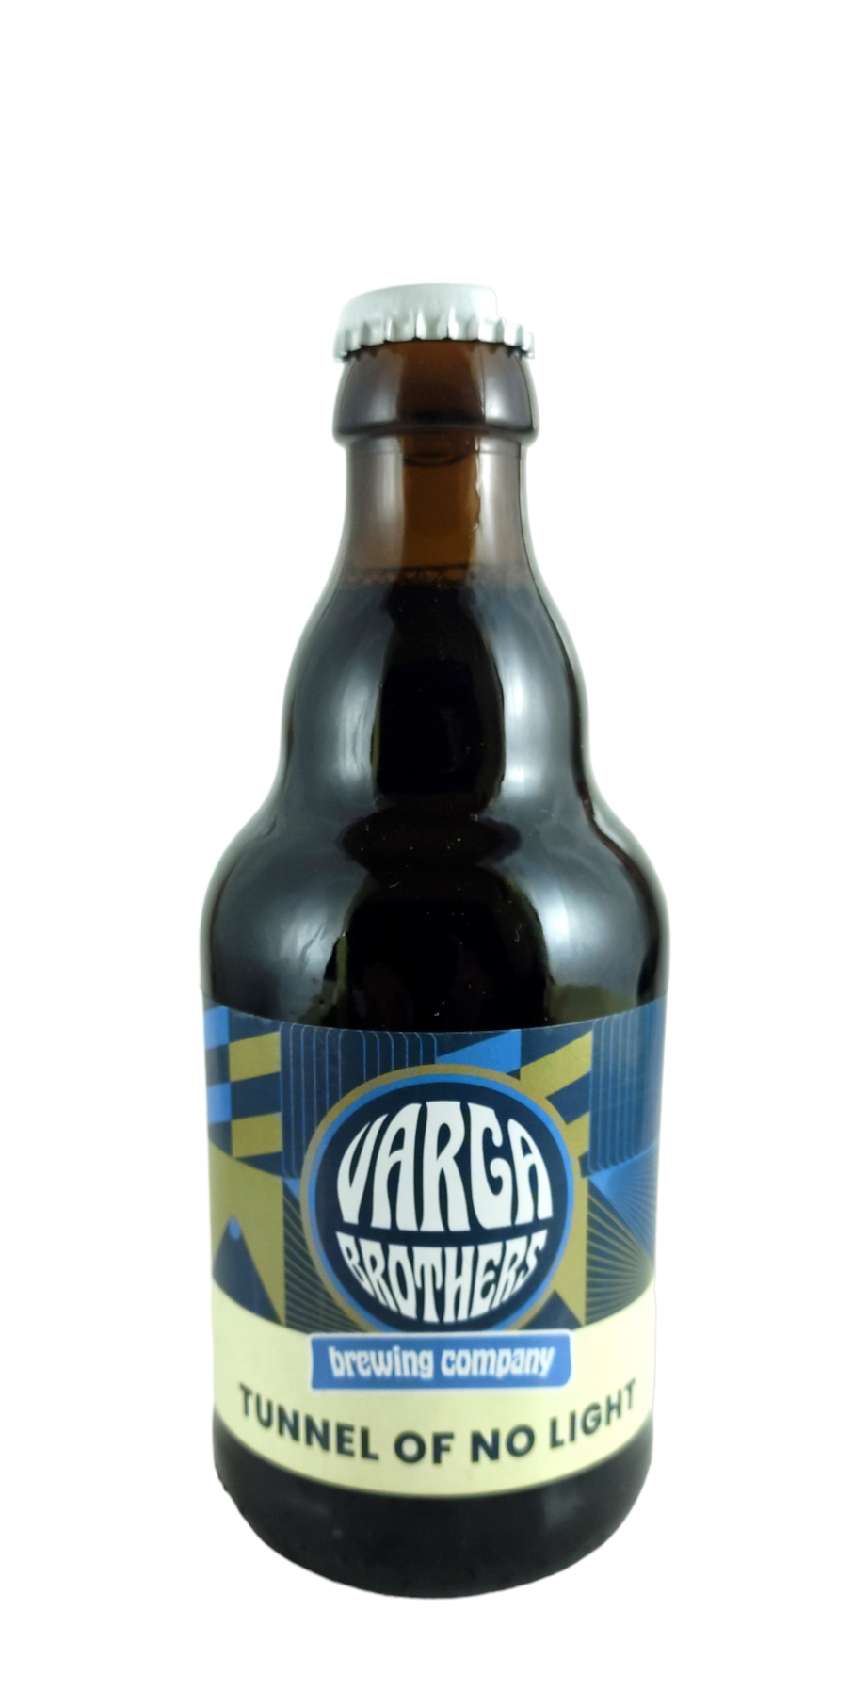 Varga Brothers Tunnel of No Light Stout